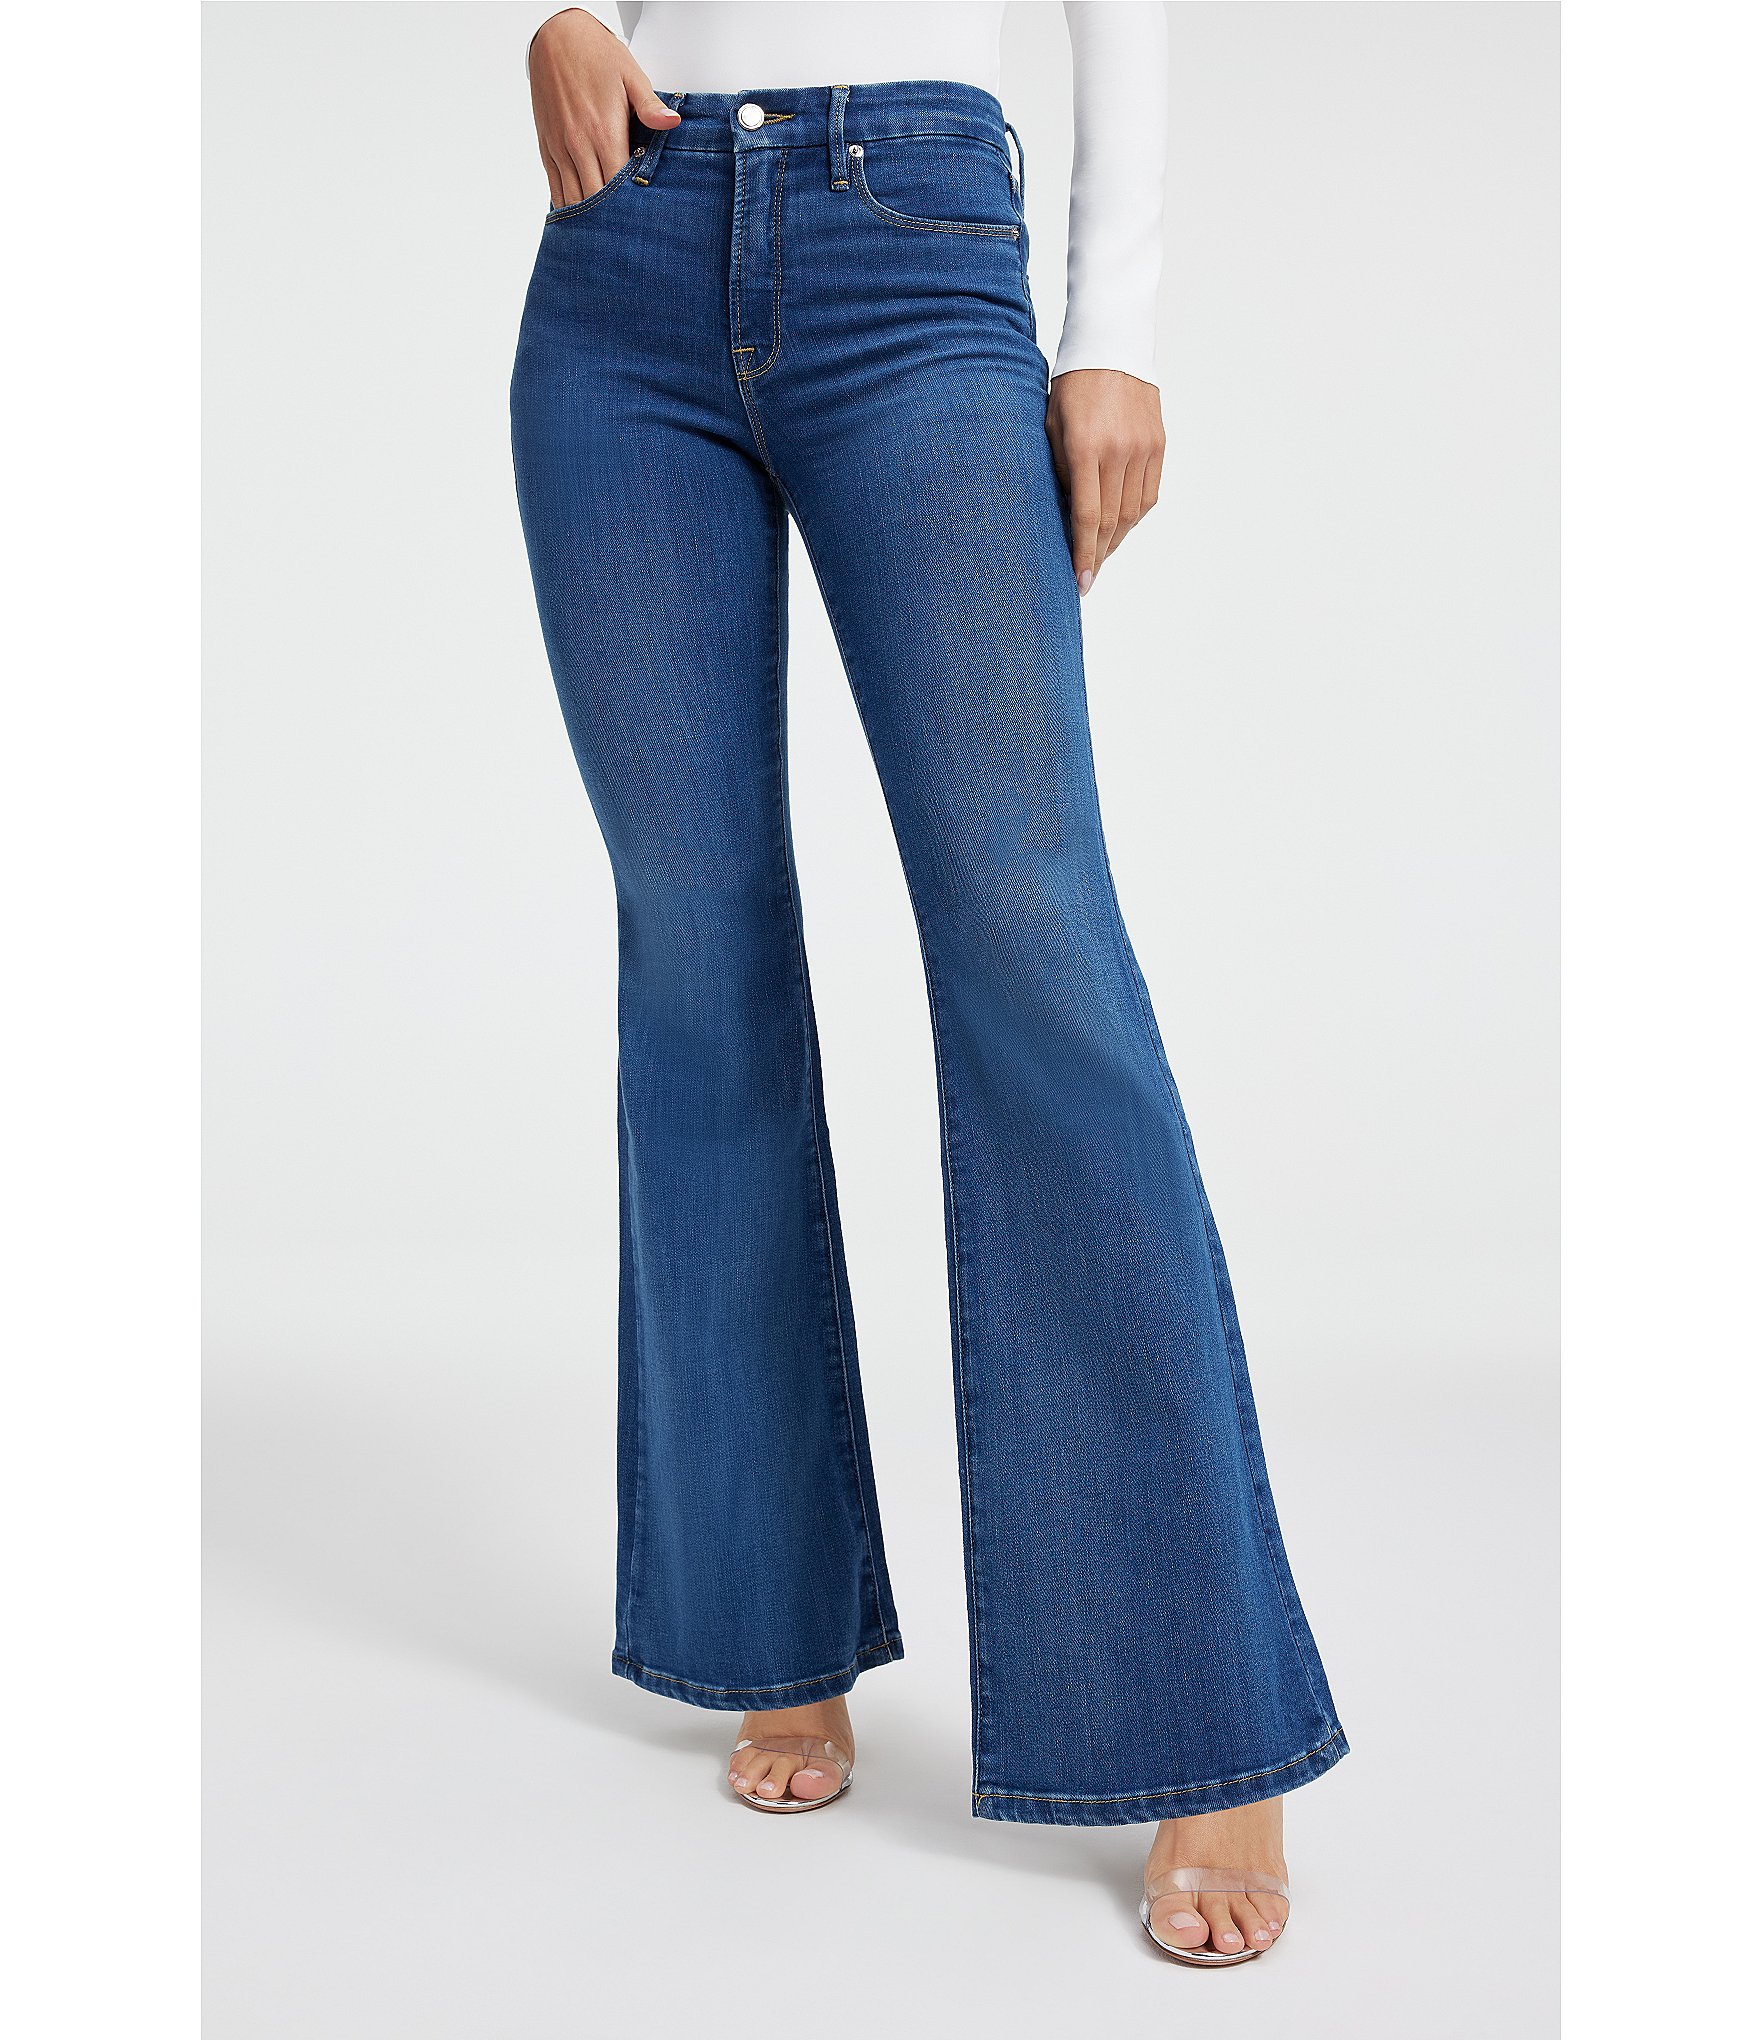 Straight stretch jeans - Gina Tricot